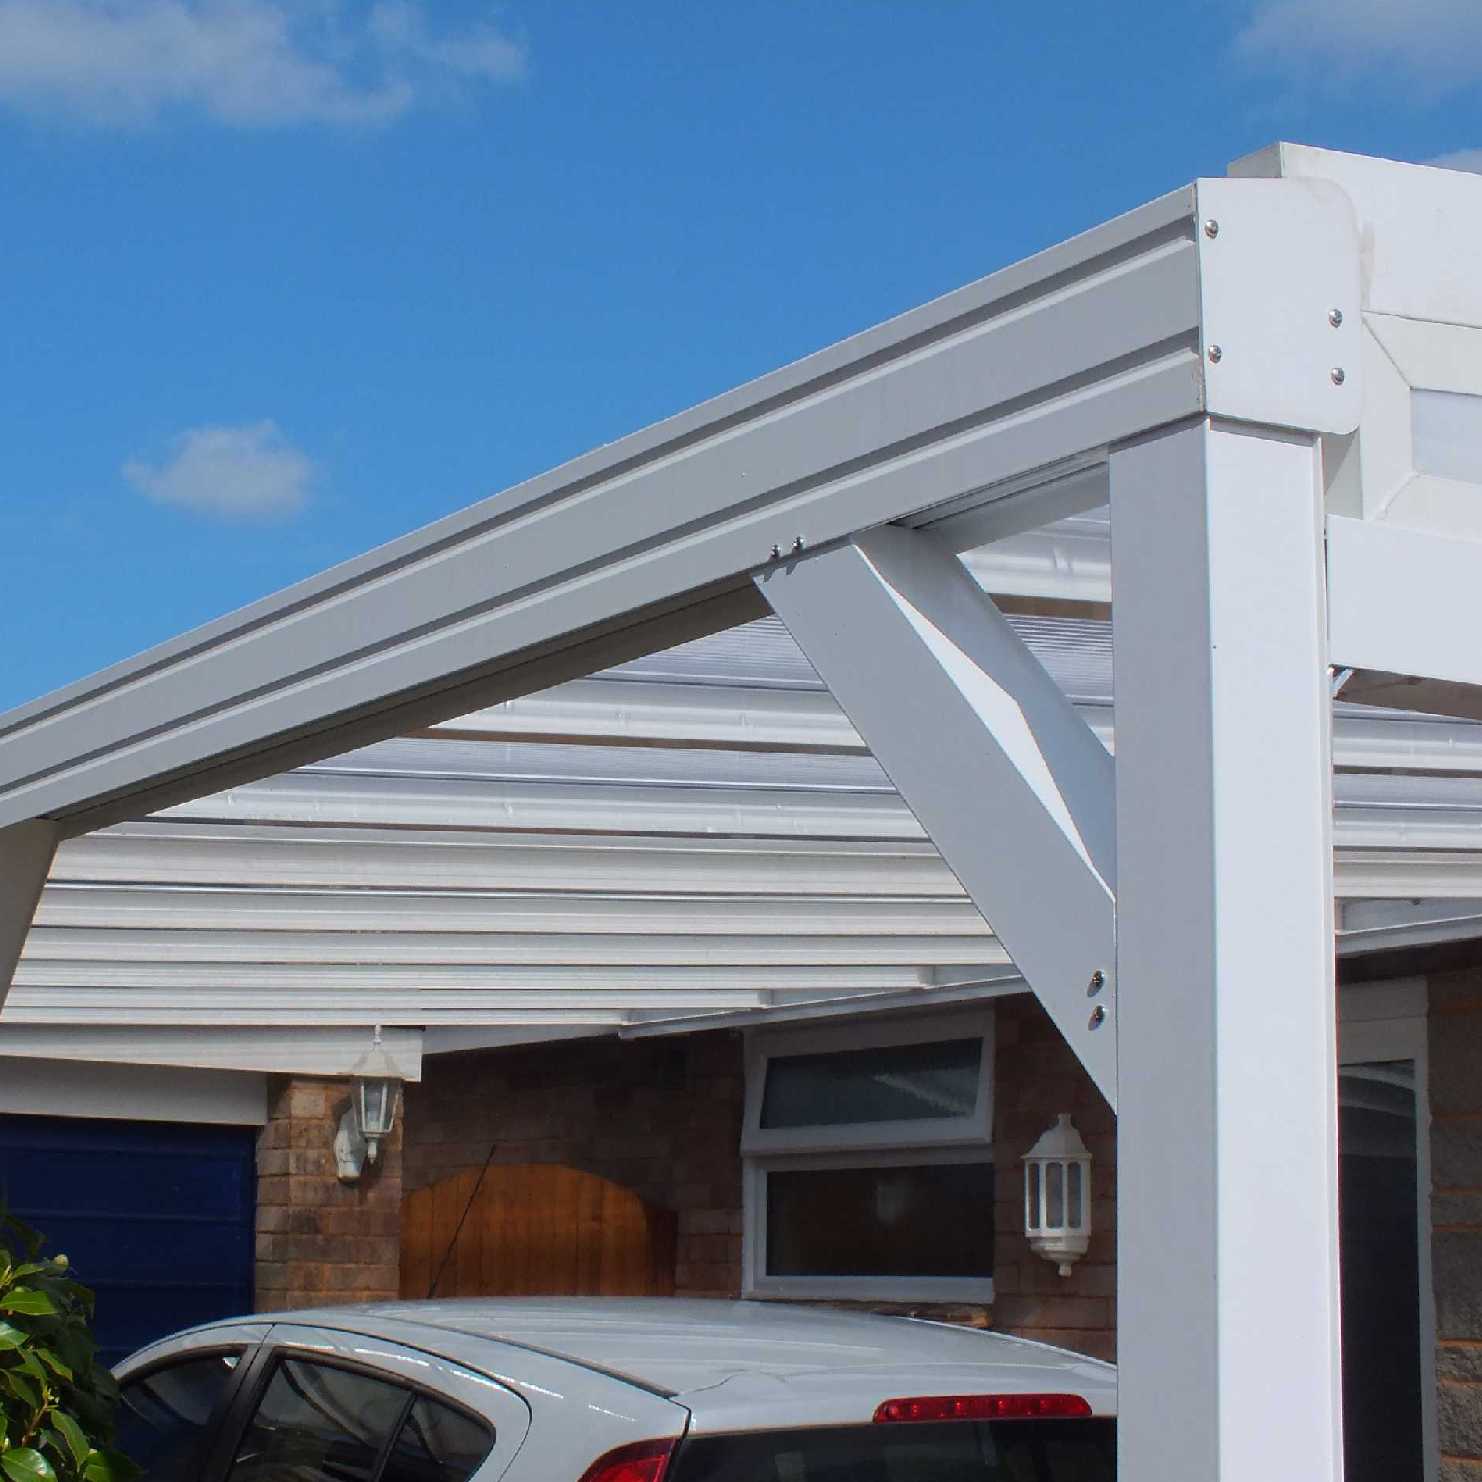 Great deals on Omega Smart Lean-To Canopy, White with 16mm Polycarbonate Glazing - 5.2m (W) x 2.0m (P), (3) Supporting Posts